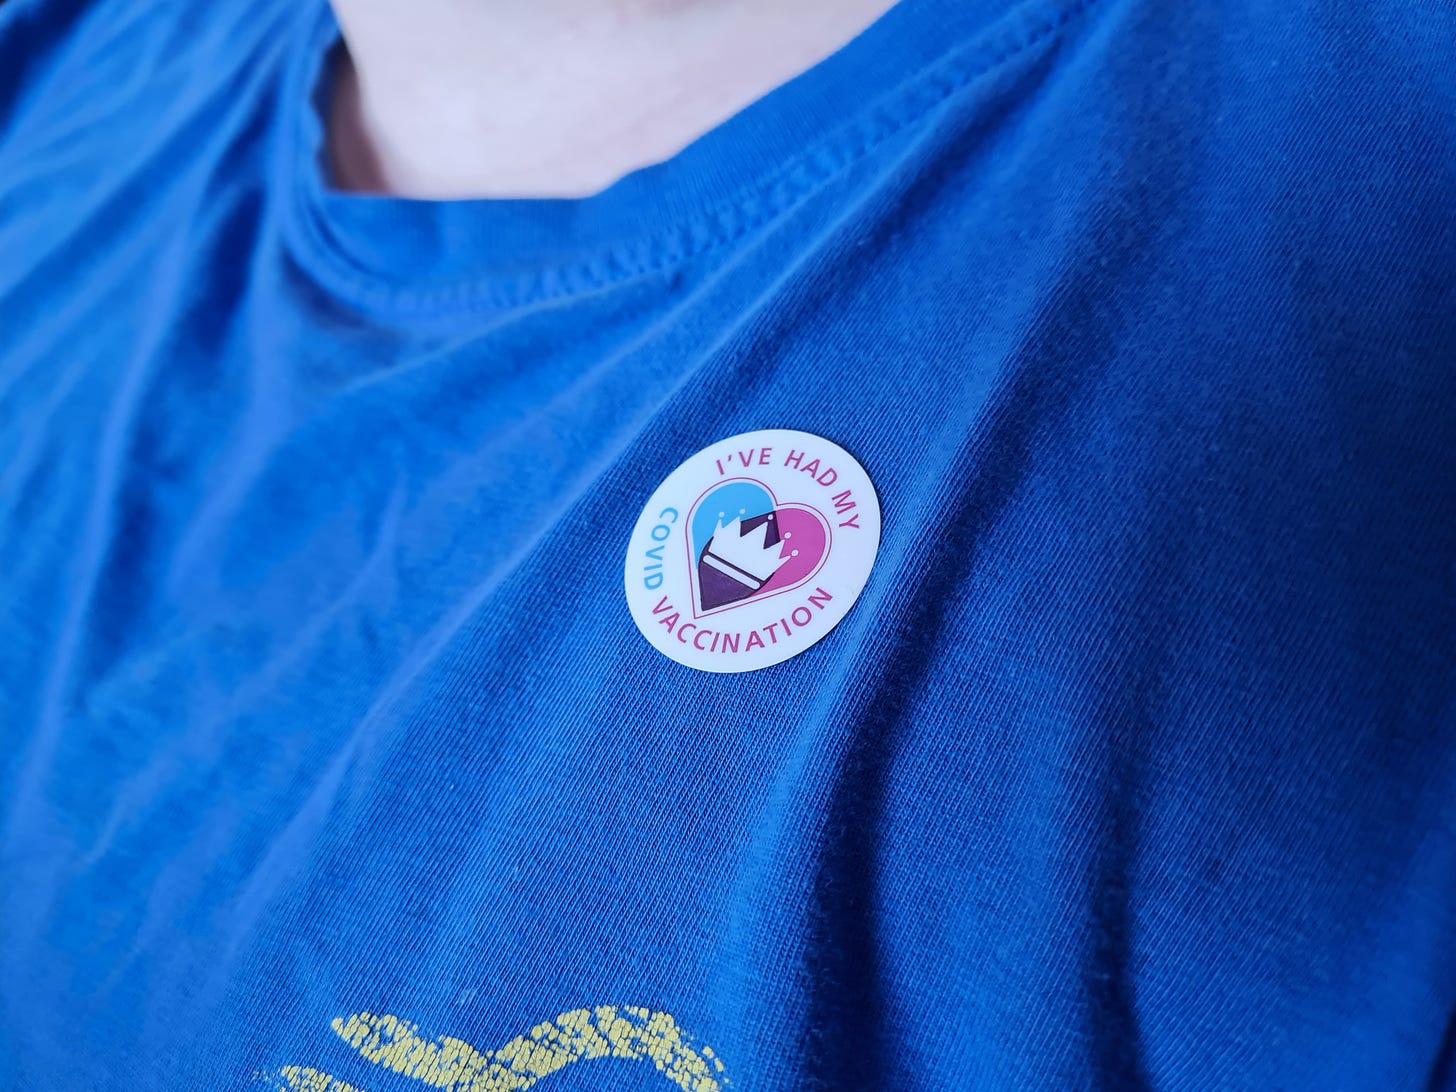 A blue t-shirt with an "I've had my Covid Vaccination" sticker on it